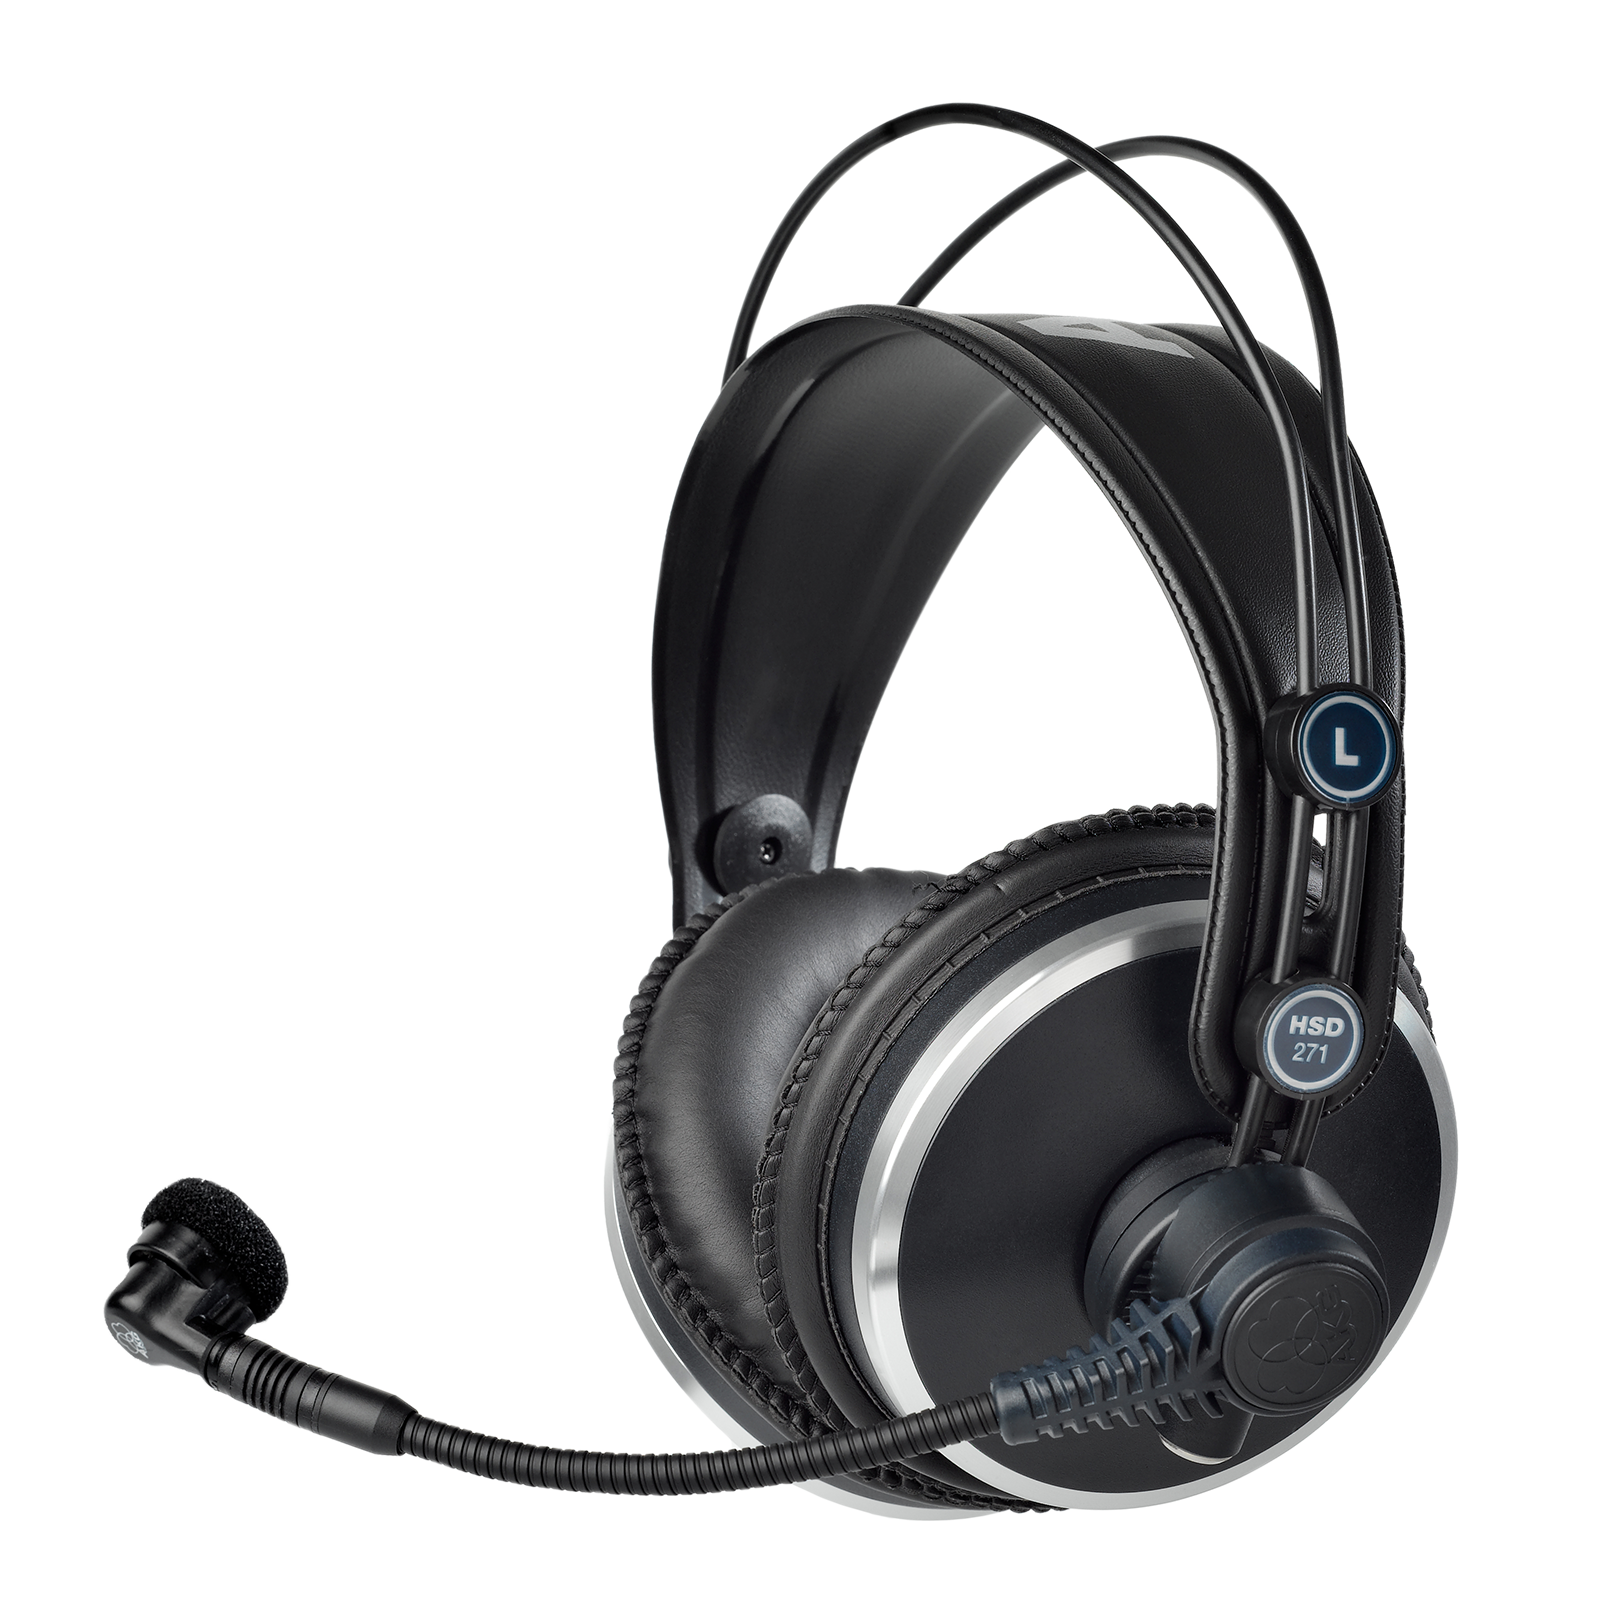 HSD271 - Black - Professional over-ear headset with dynamic microphone - Hero